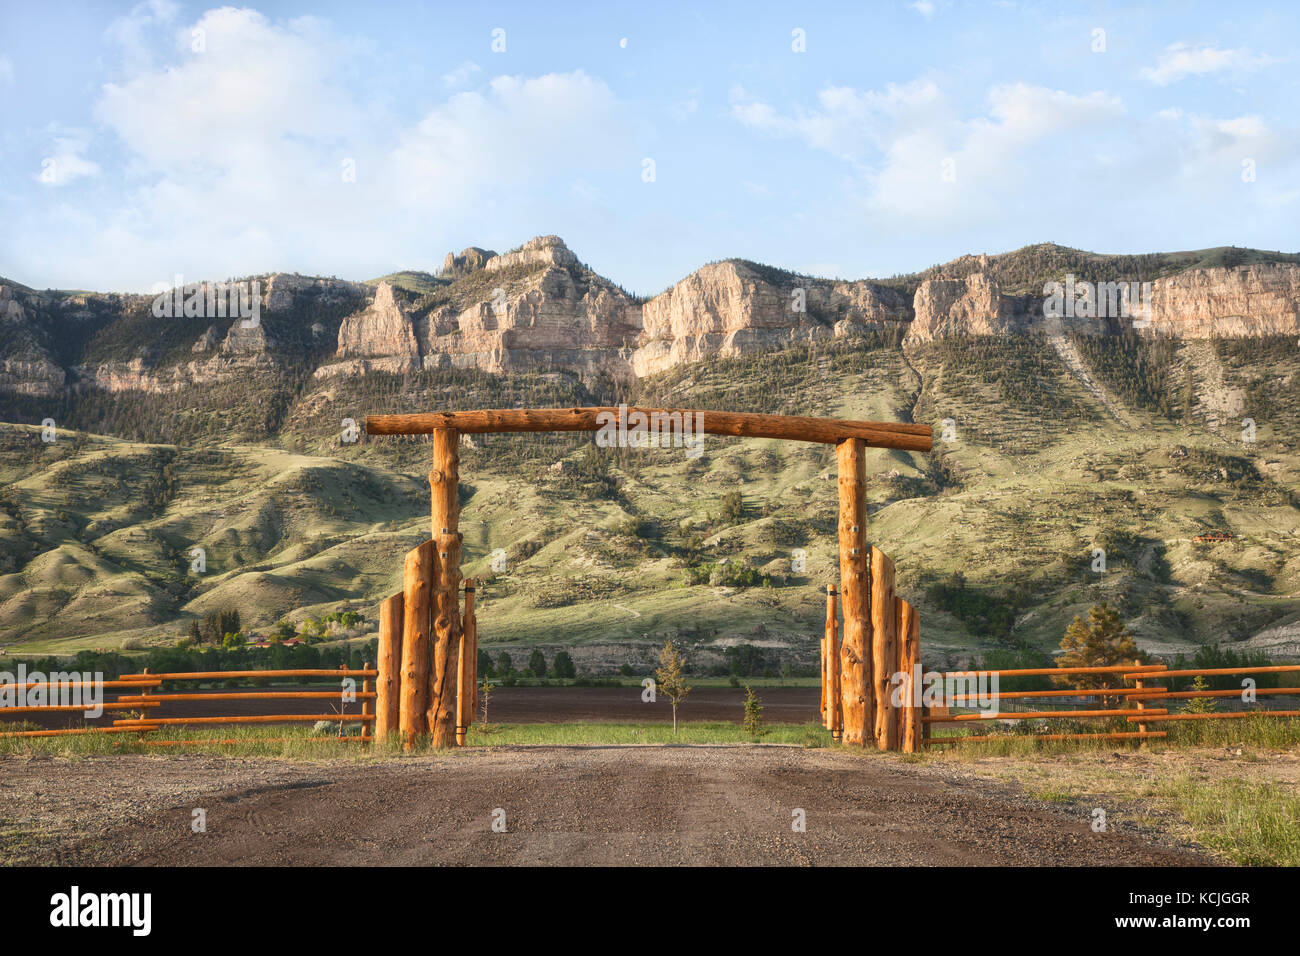 A wooden ranch gate in front of rocky cliffs in Wyoming, USA Stock Photo